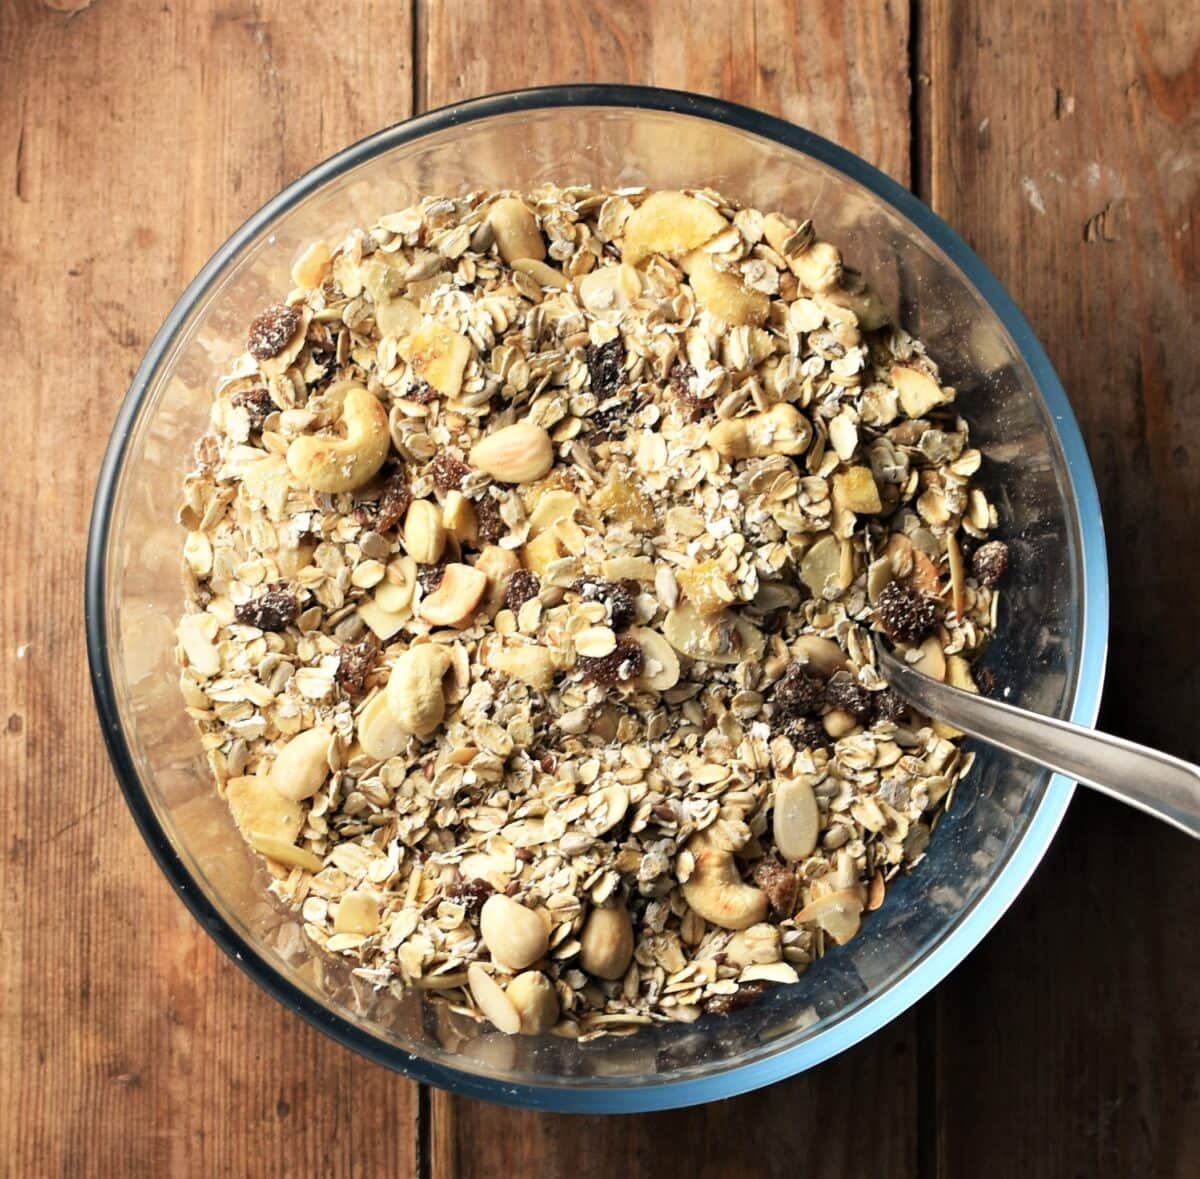 Muesli in mixing bowl with spoon.